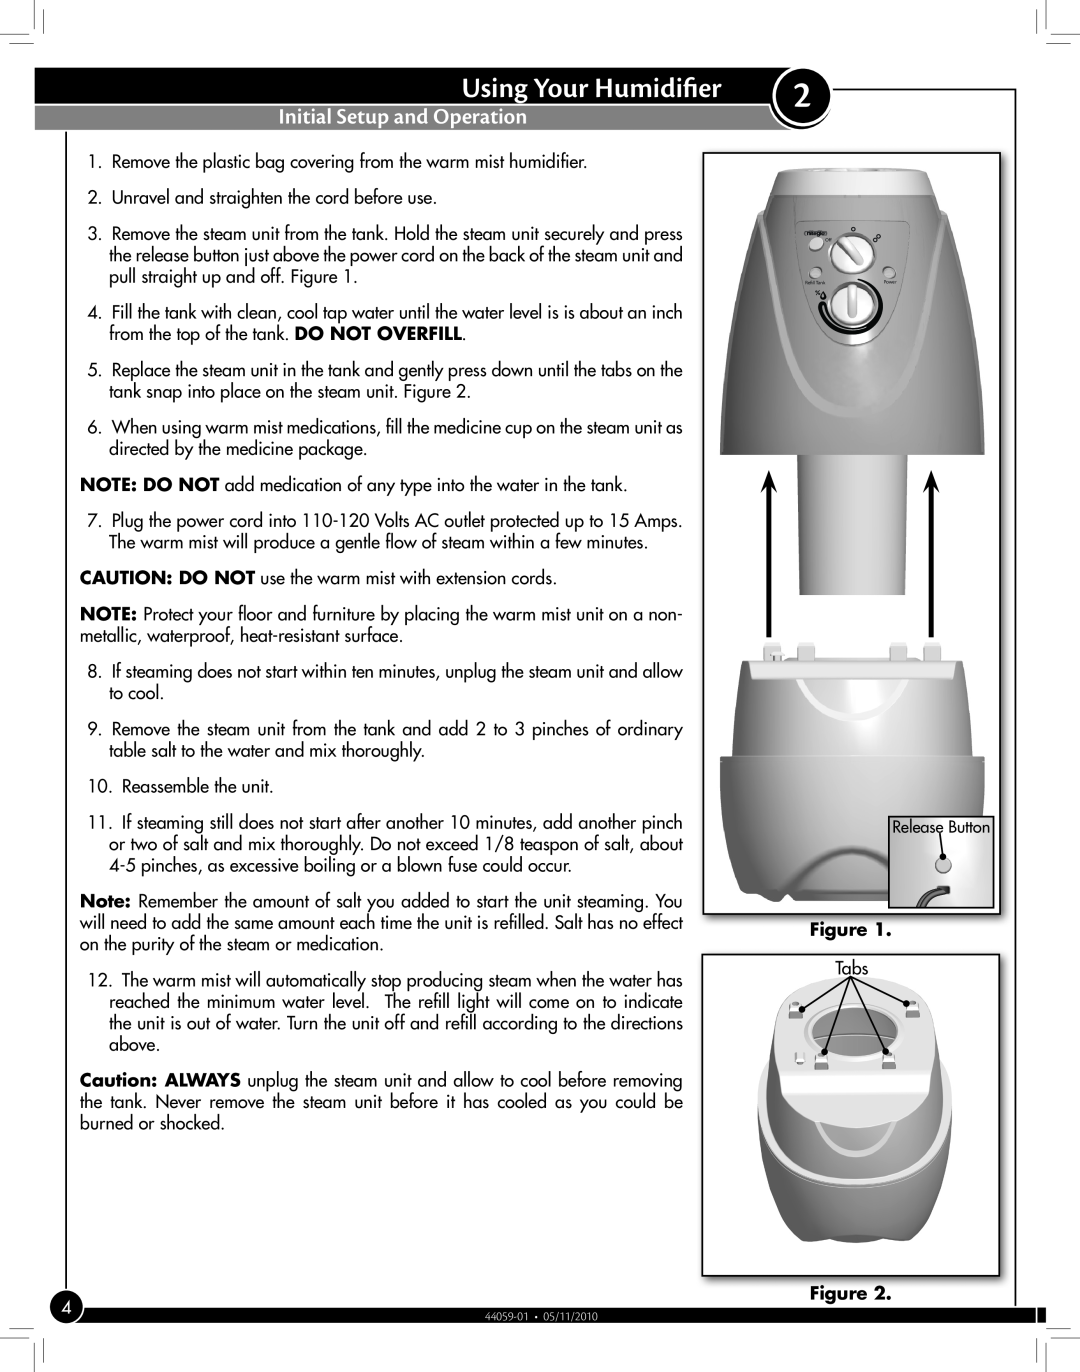 Hunter Fan 35216 manual Using Your Humidifier, Initial Setup and Operation 